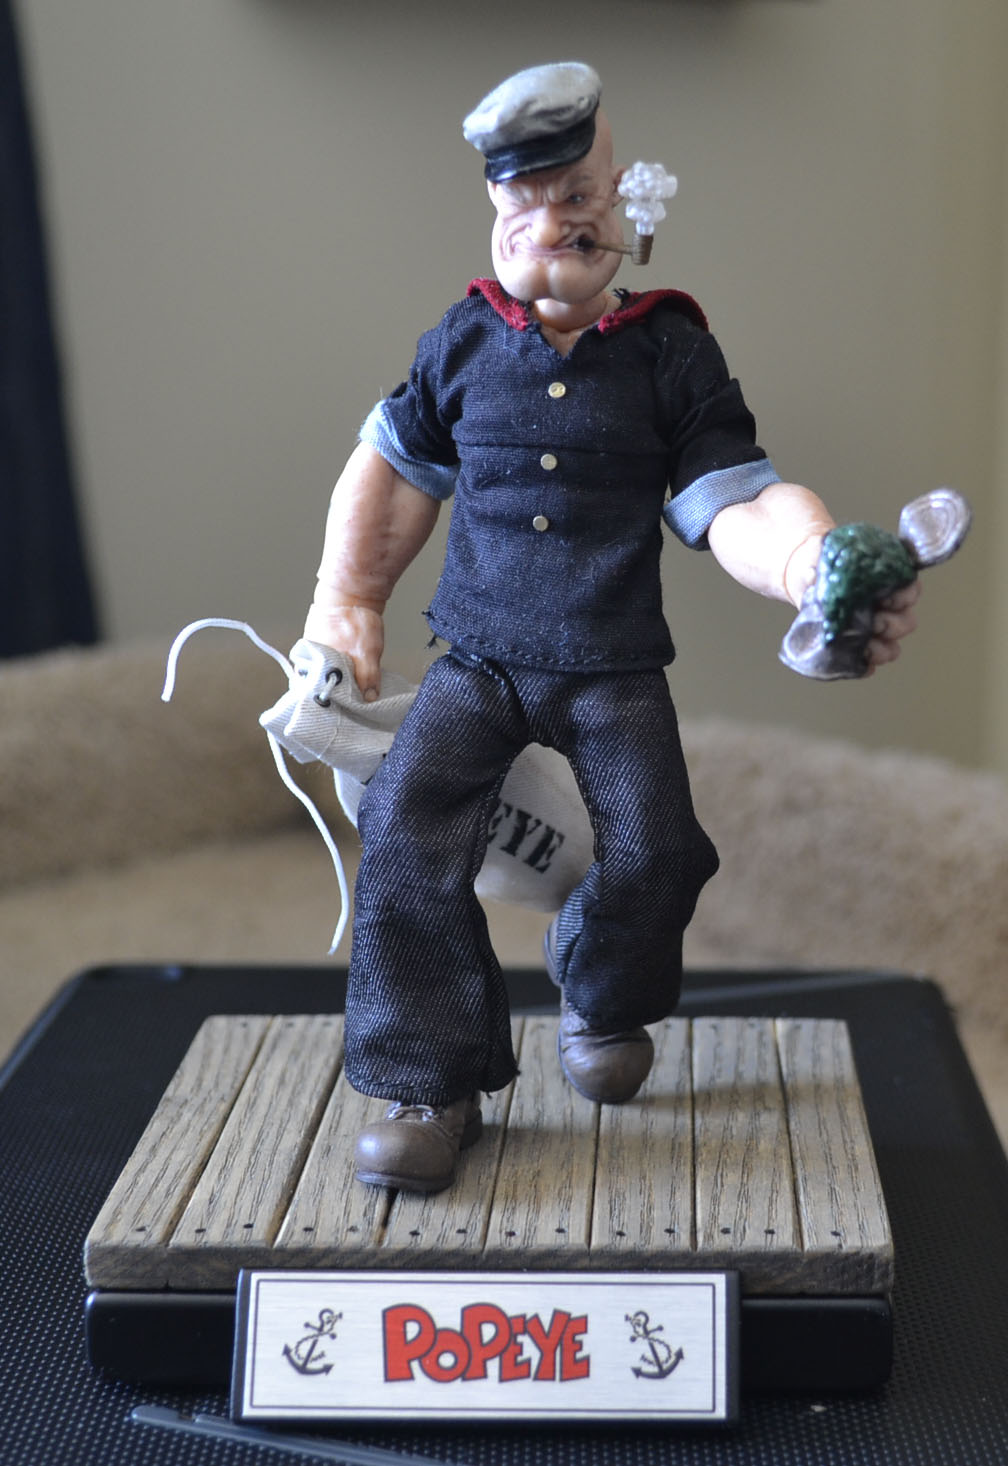 Mezco One:12 Collective Popeye Review (mostly prototype photos, and pics by others) - Page 2 _dsc3062